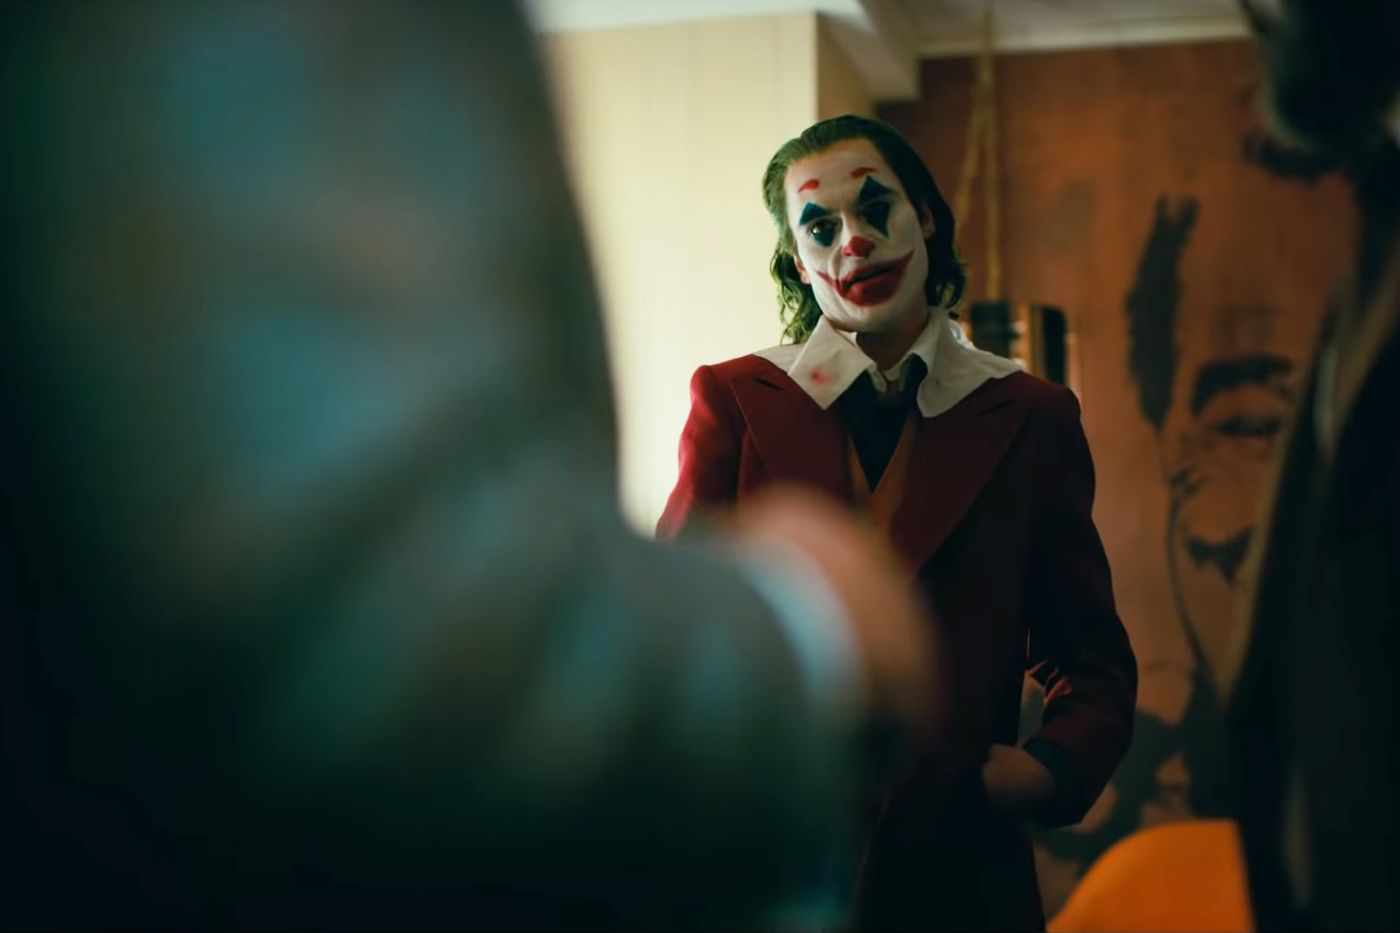 Why Is the Movie 'Joker' and Not 'The Joker'?